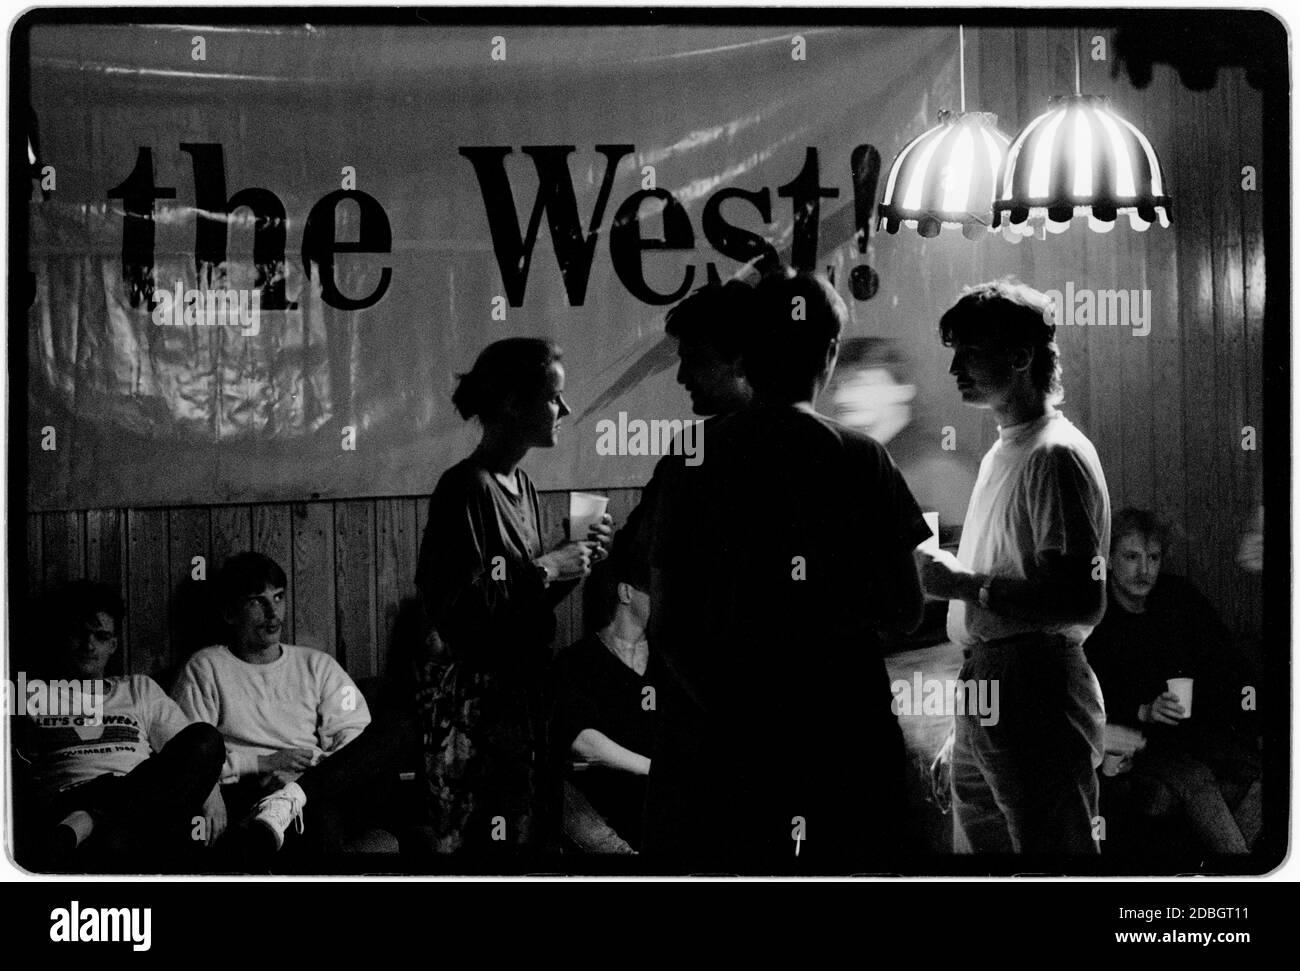 East Germany 1990 scanned in 2020 Rostock on the Baltic coast. Young people enjoy a dance at the Disco sponsered by West cigarettes in 1990 East Germany, Deutsche Demokratische Republik the DDR after the fall of the Wall but before reunification March 1990 and scanned in 2020.East Germany, officially the German Democratic Republic, was a country that existed from 1949 to 1990, the period when the eastern portion of Germany was part of the Eastern Bloc during the Cold War. Stock Photo